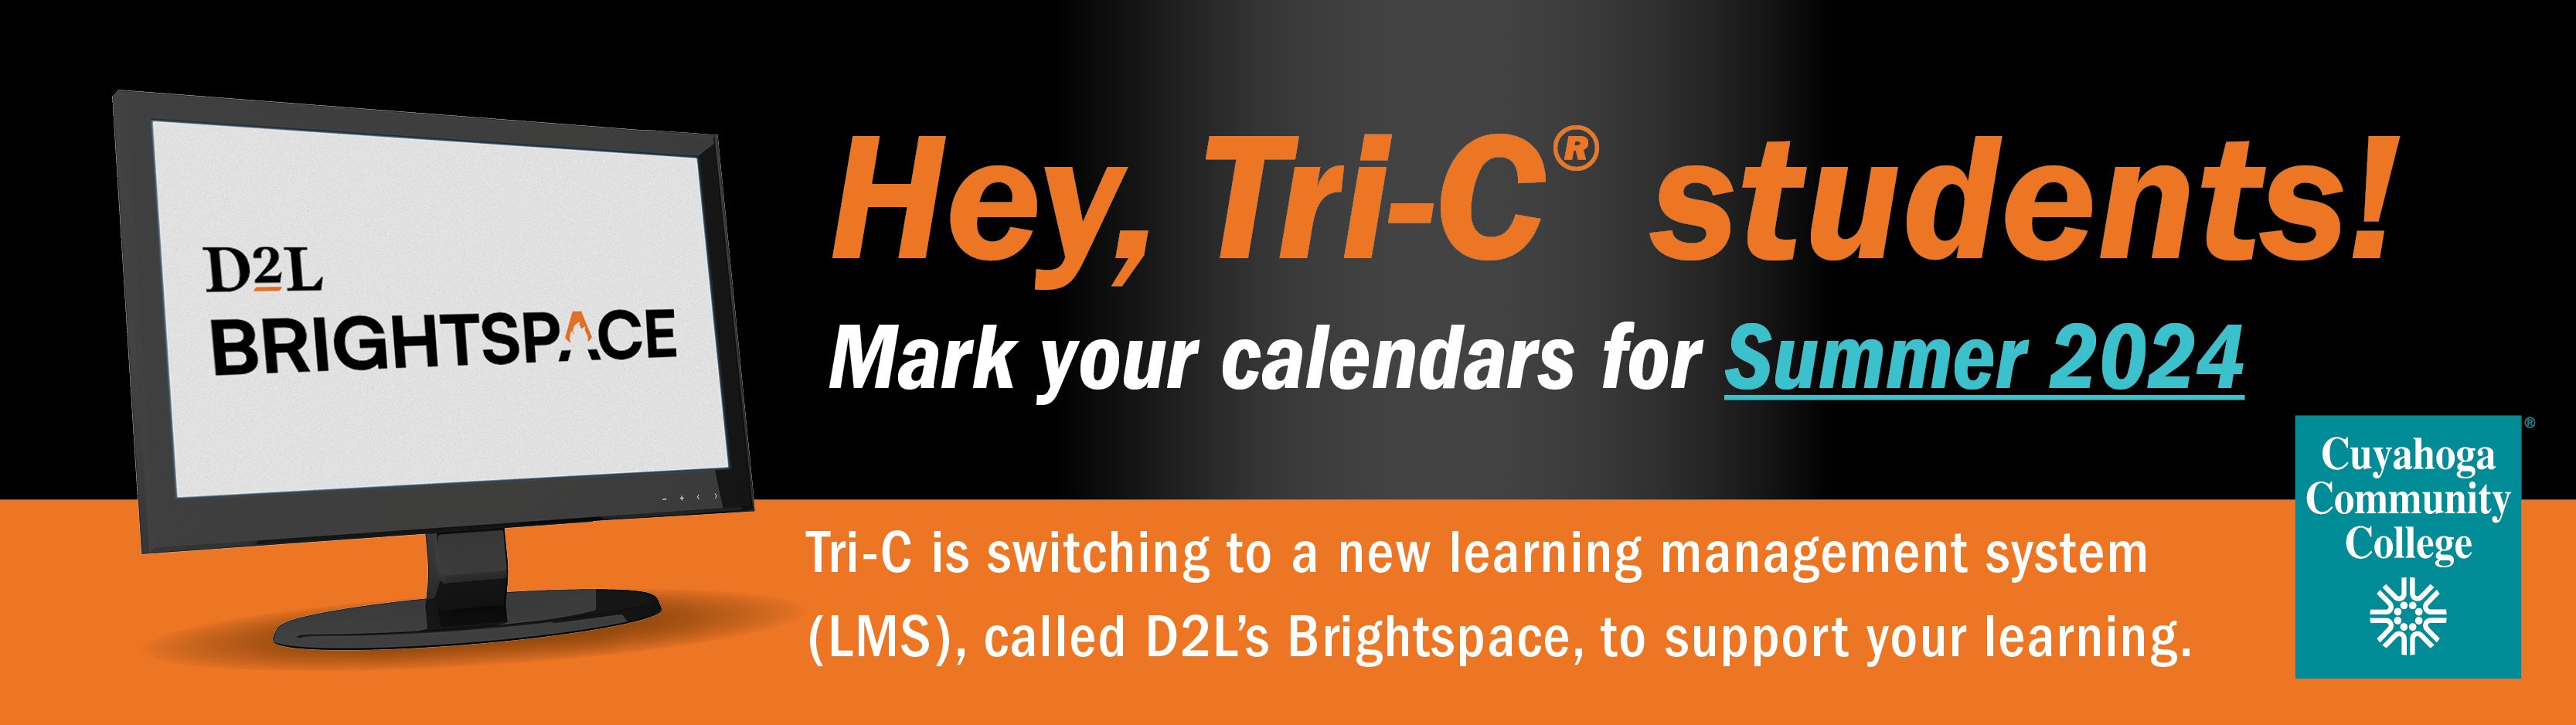 Promotion of Tri-C's move to Brightspace Learning Management System